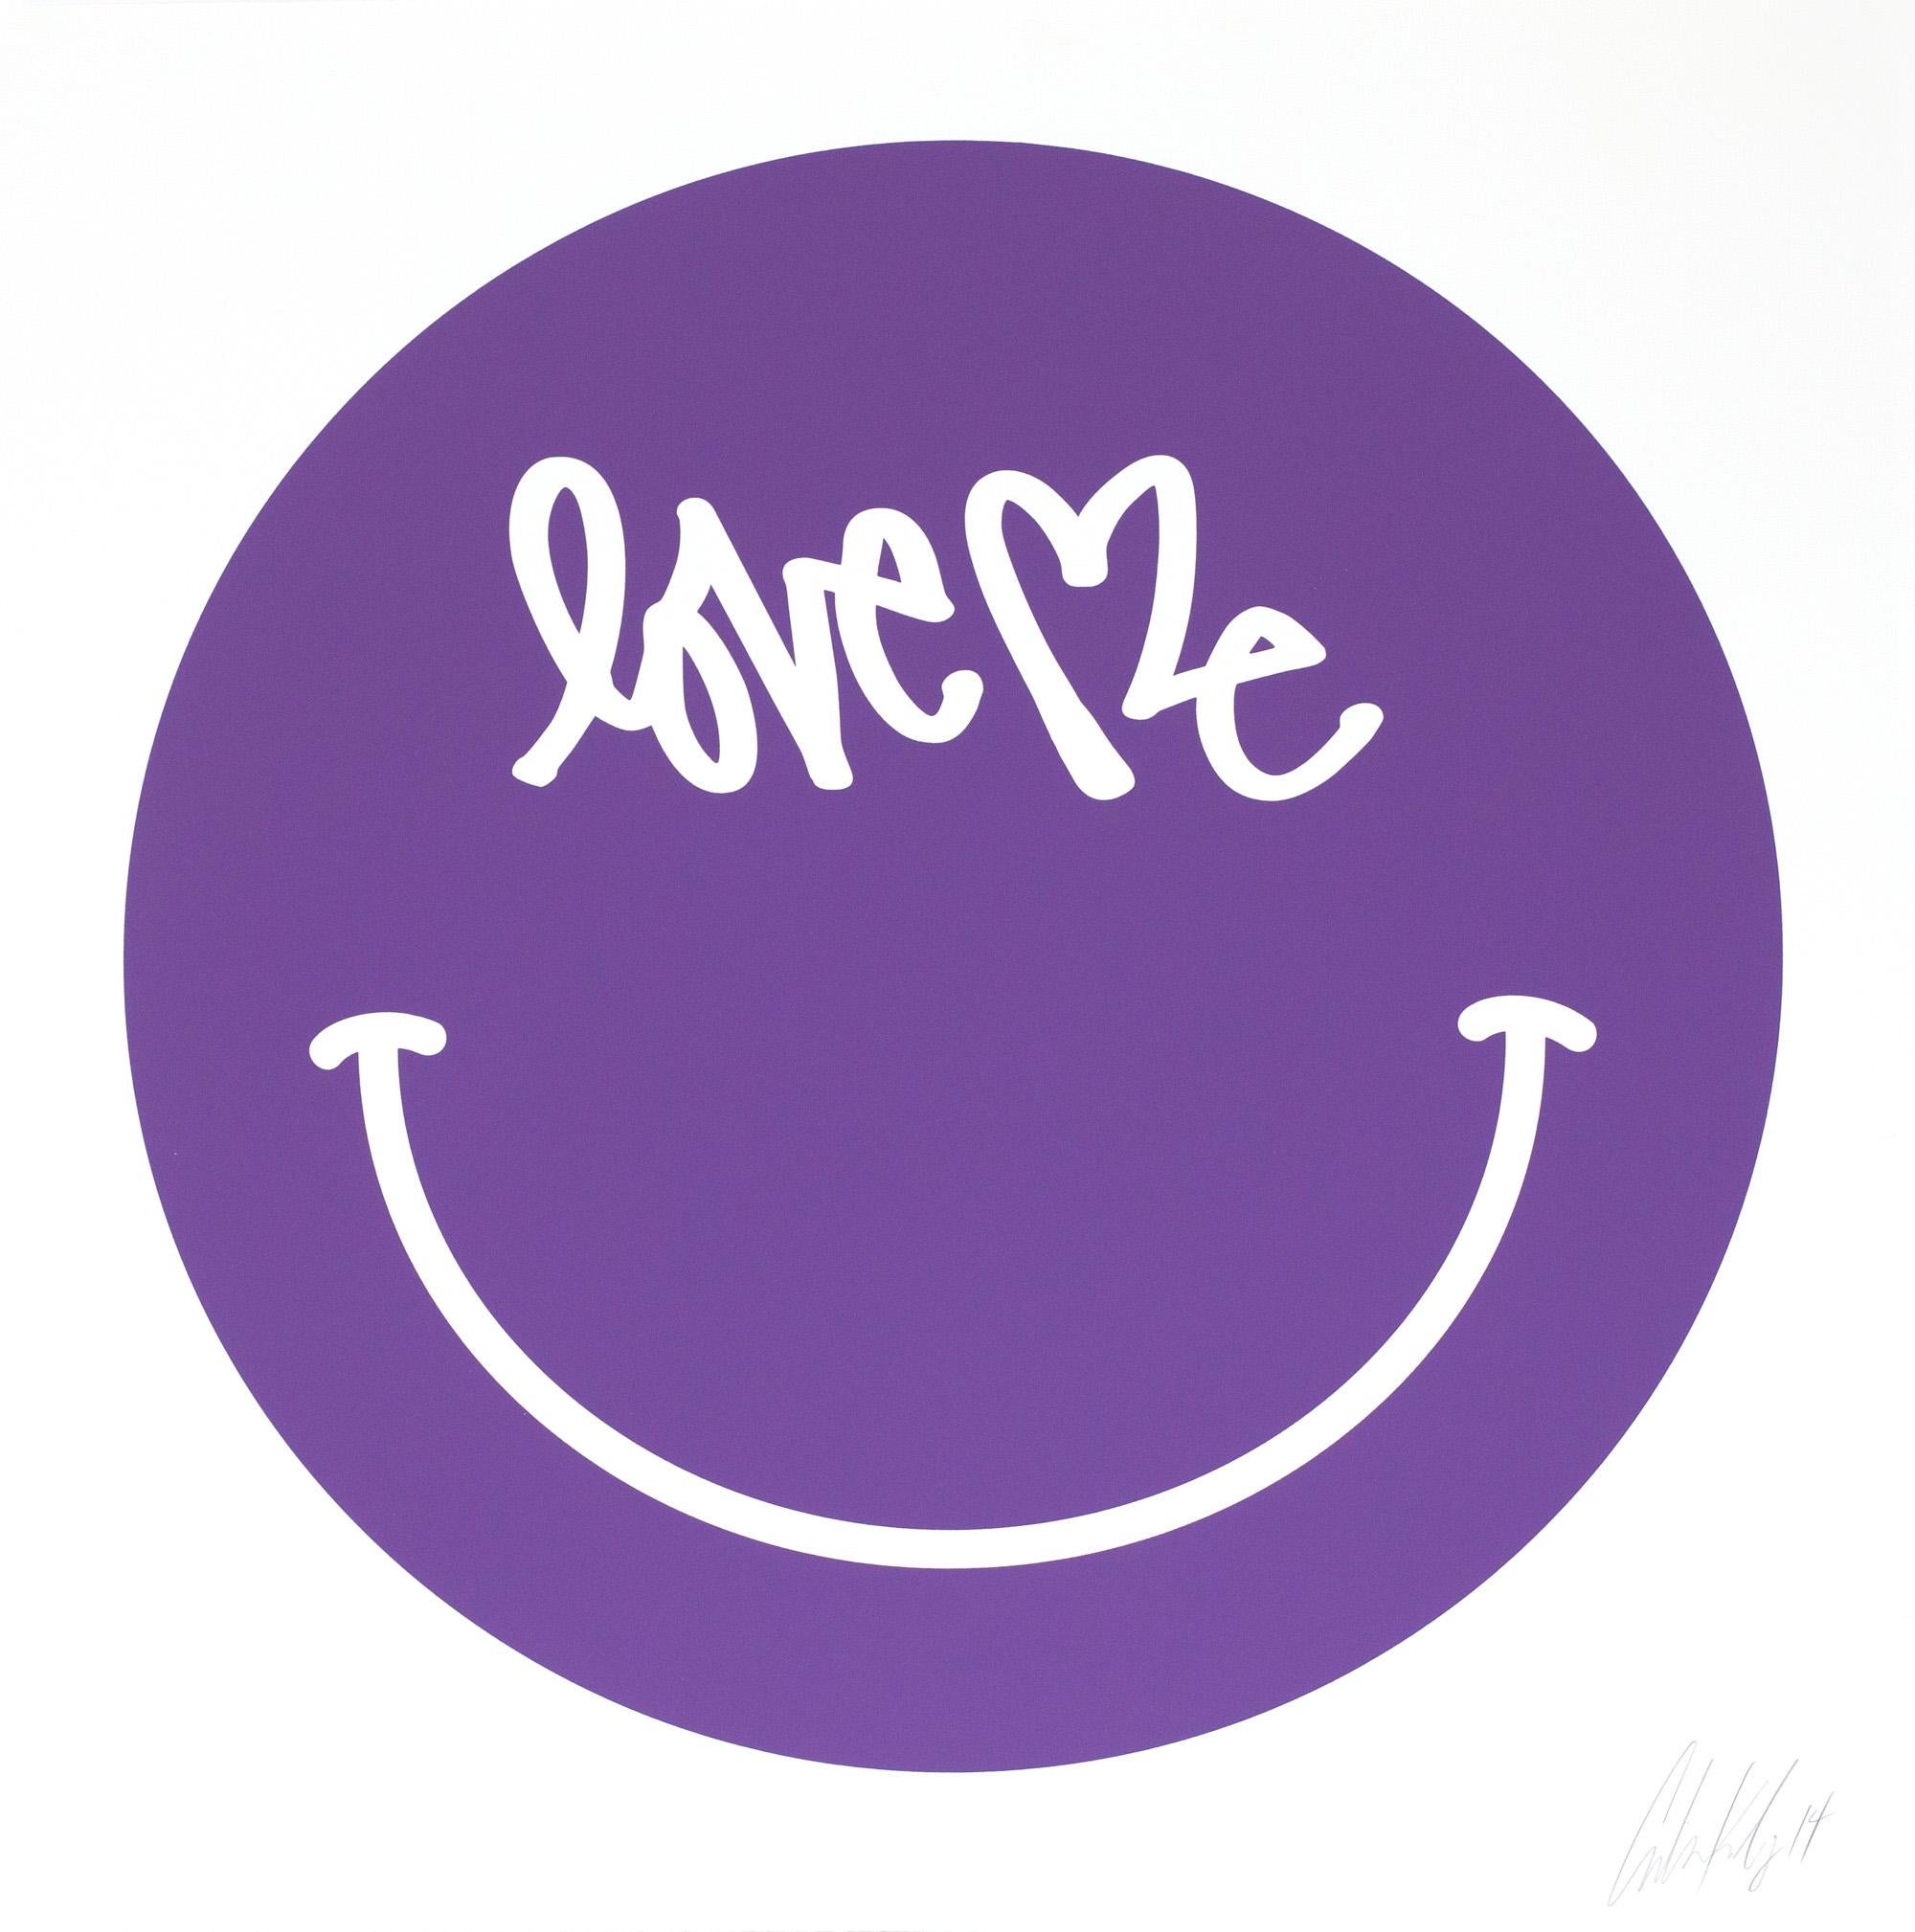 "Love Me," Purple Smiley Face screen print by New York based artist Curtis Kulig:
Using a most universal symbol, 'The Smiley', Curtis Kulig replaces the eyes with his world renown "Love Me" signature. At 28 inches square, this hand signed